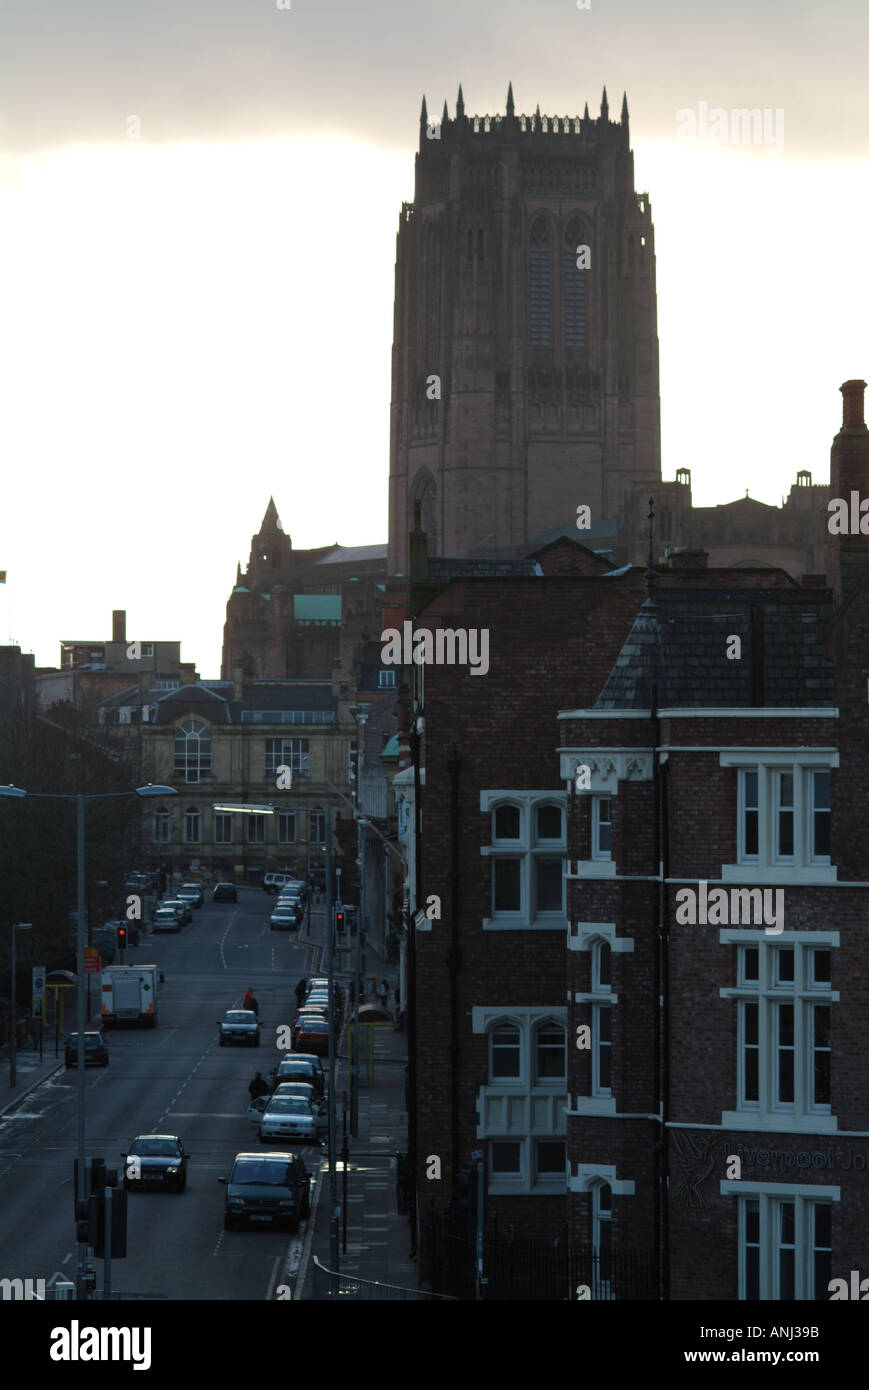 Liverpool anglican cathederal mersey side uk Stock Photo